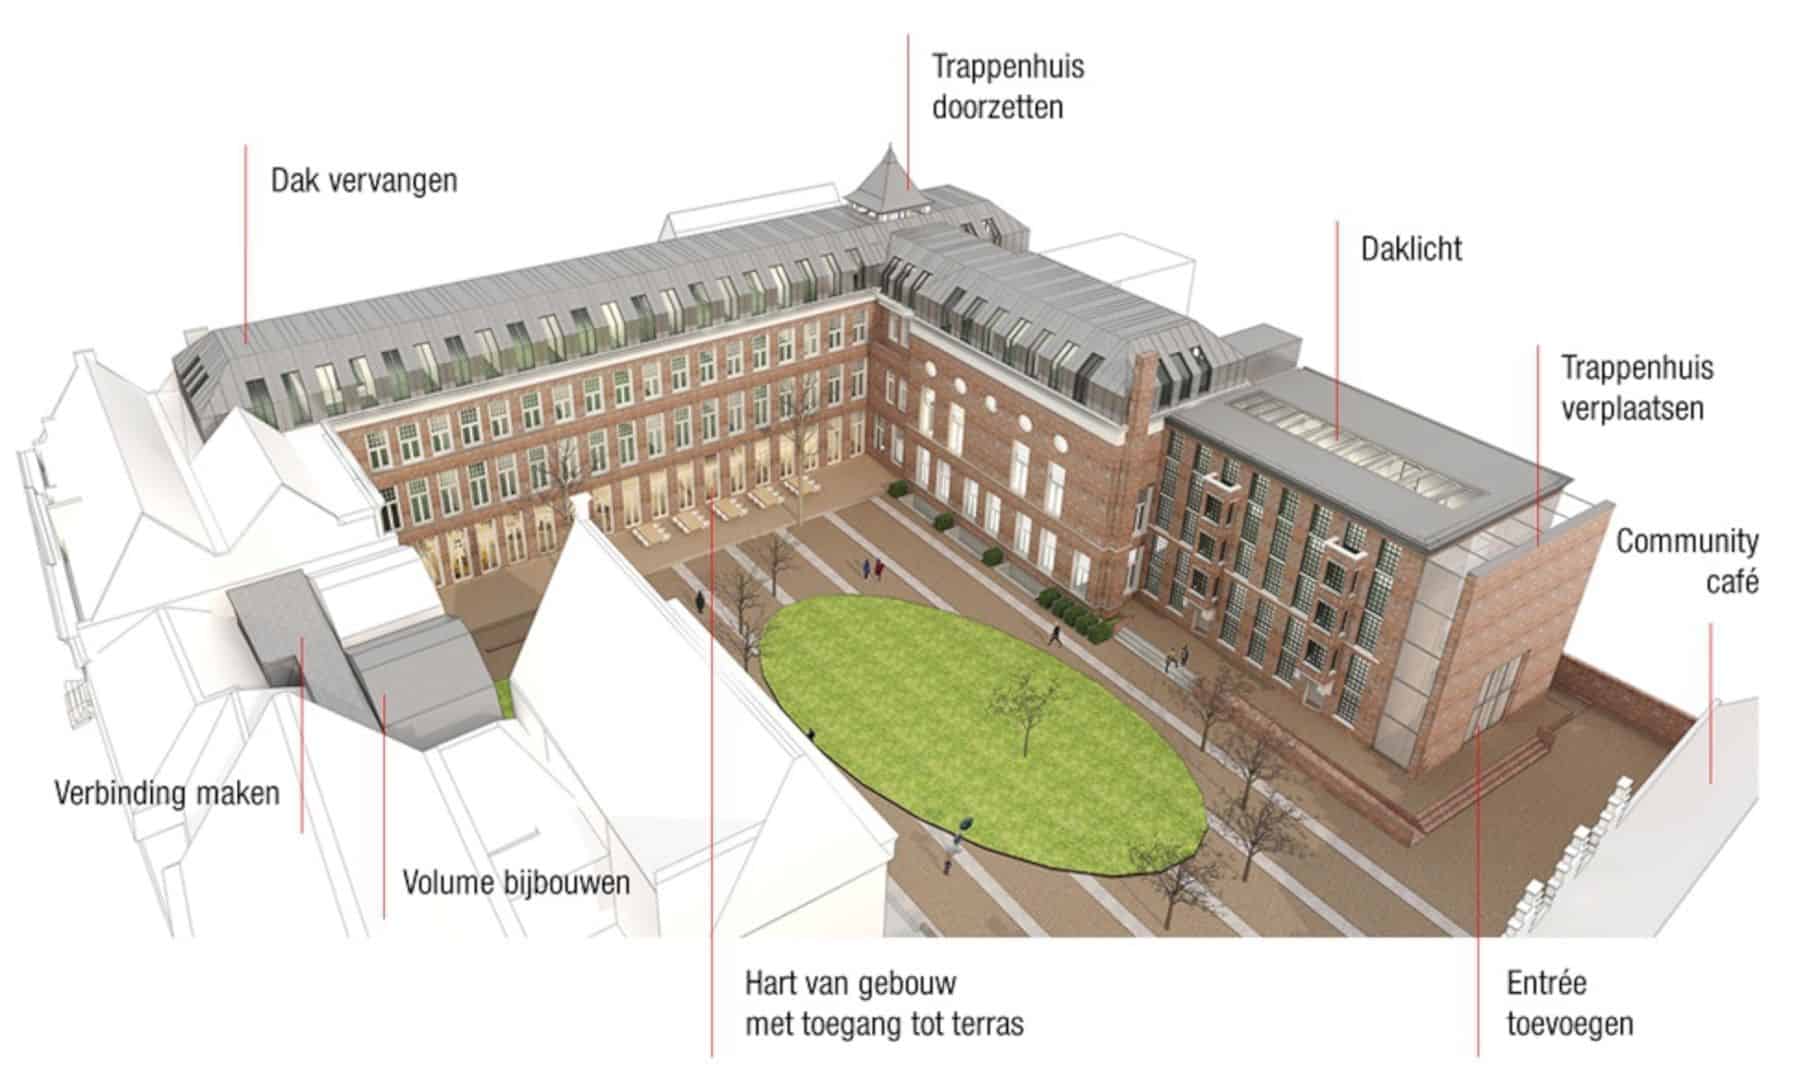 Achter Sint Peiter 200 An Elegant Transformation For A Research Community Of The University Of Utrecht 1